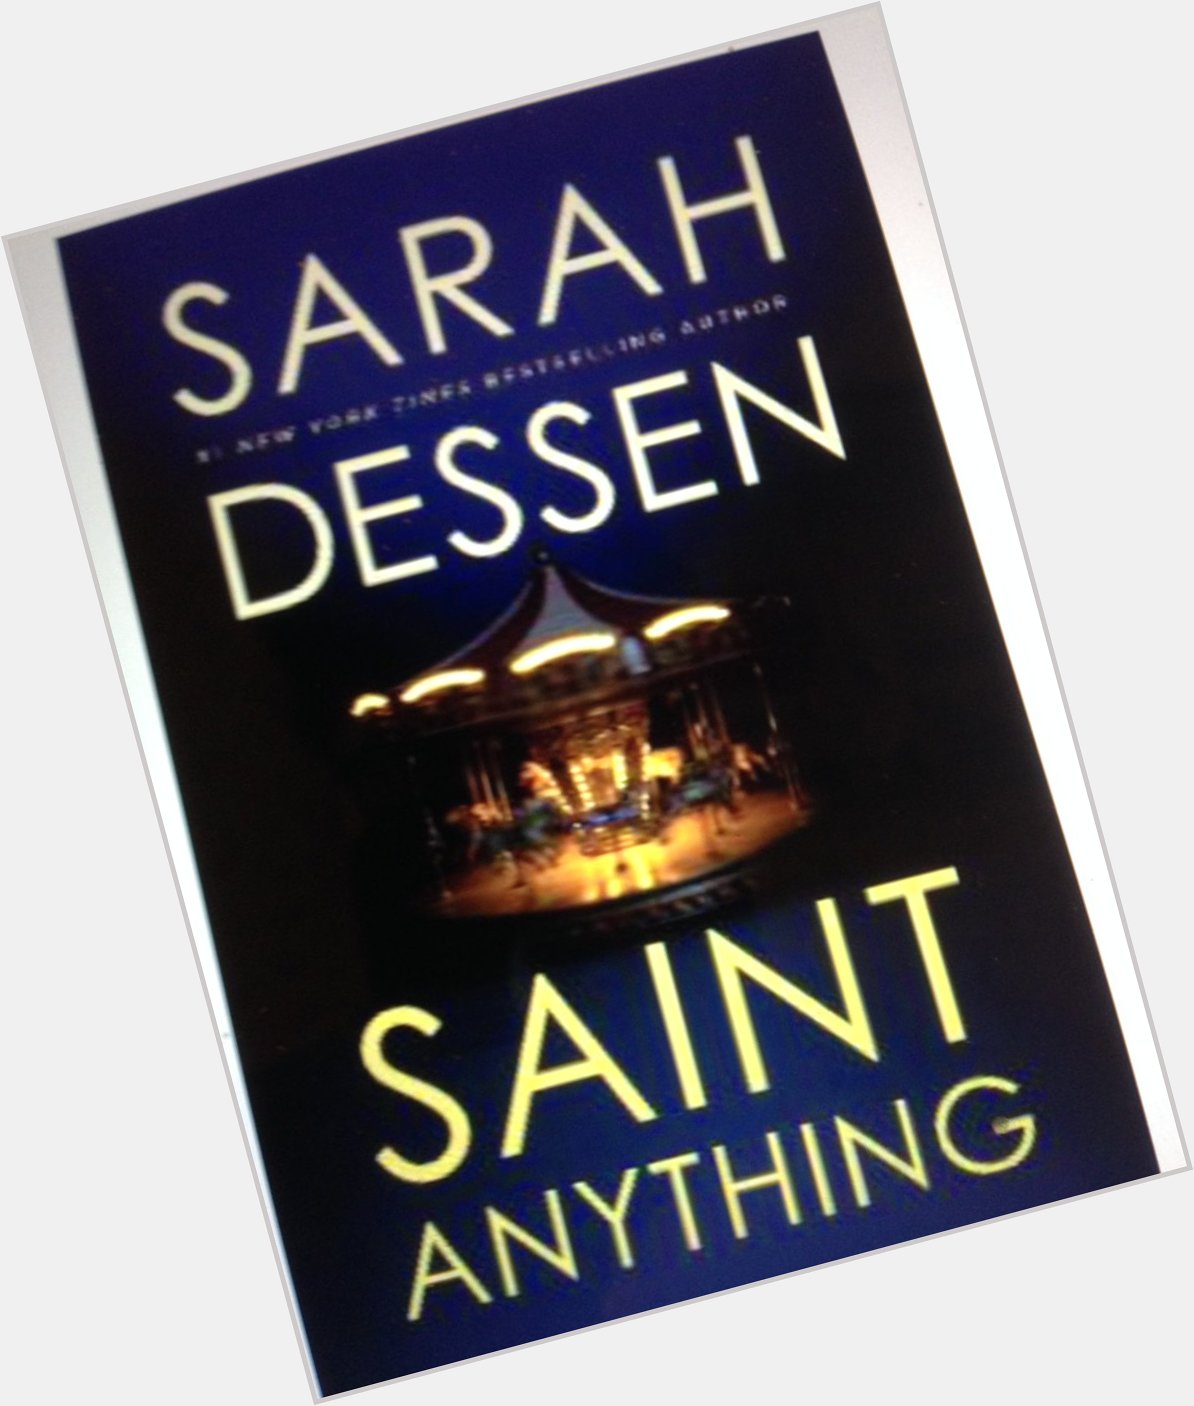 Happy Birthday Sarah Dessen! Meet Sydney, brother Peyton, the Chathams, Mac in particular! How do they interact? 